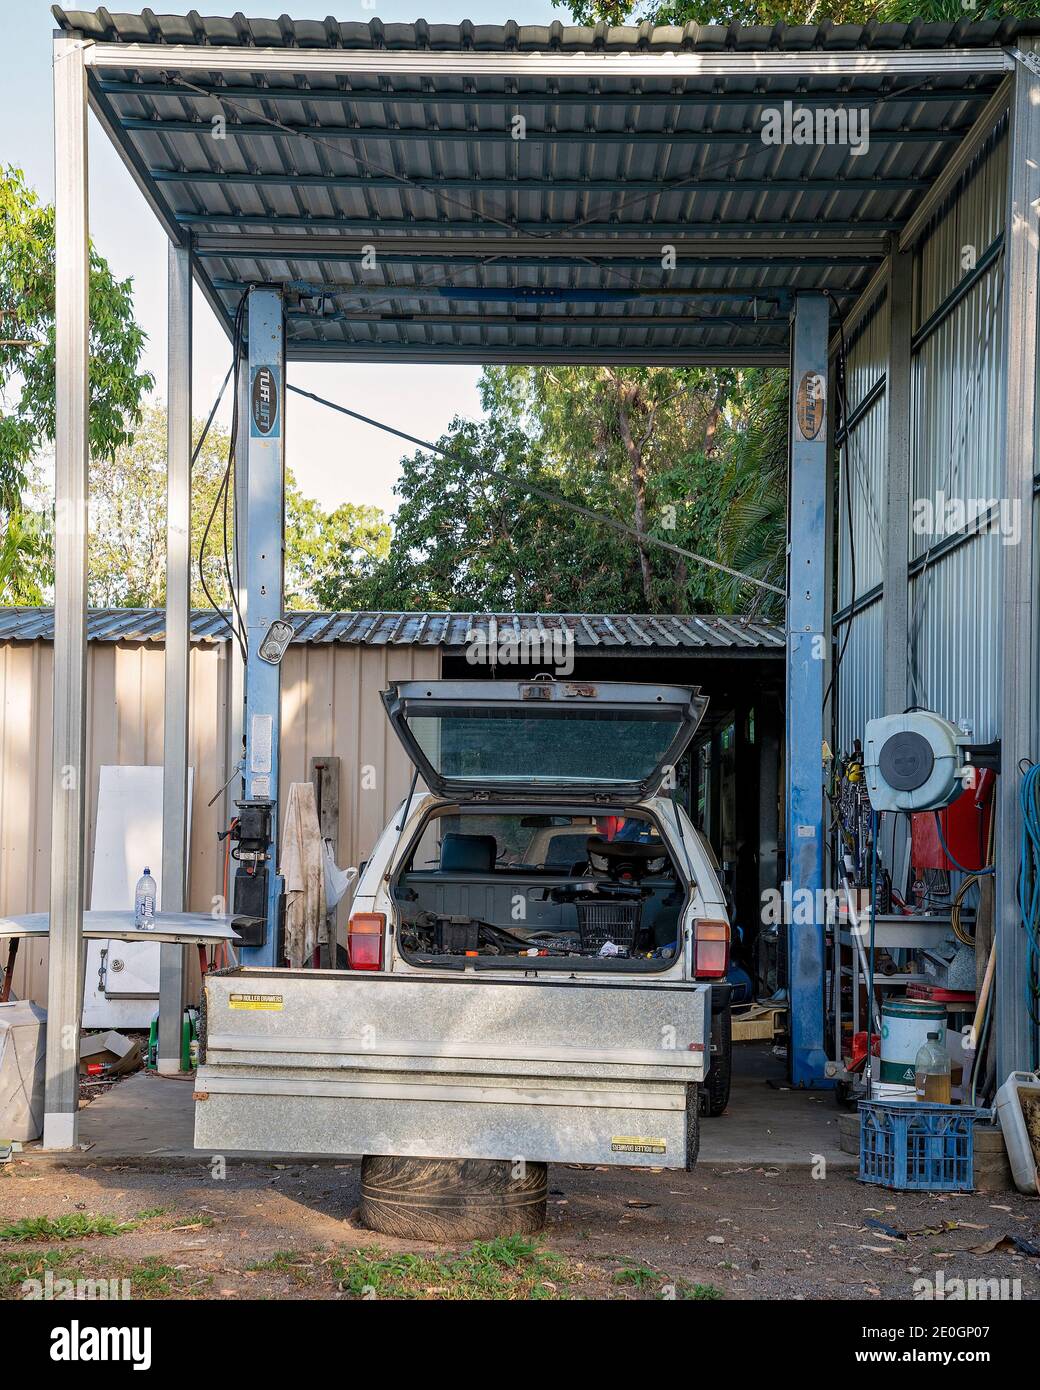 Townsville, Queensland, Australia - December 2020: An old station wagon car parked in a shed and under repair Stock Photo